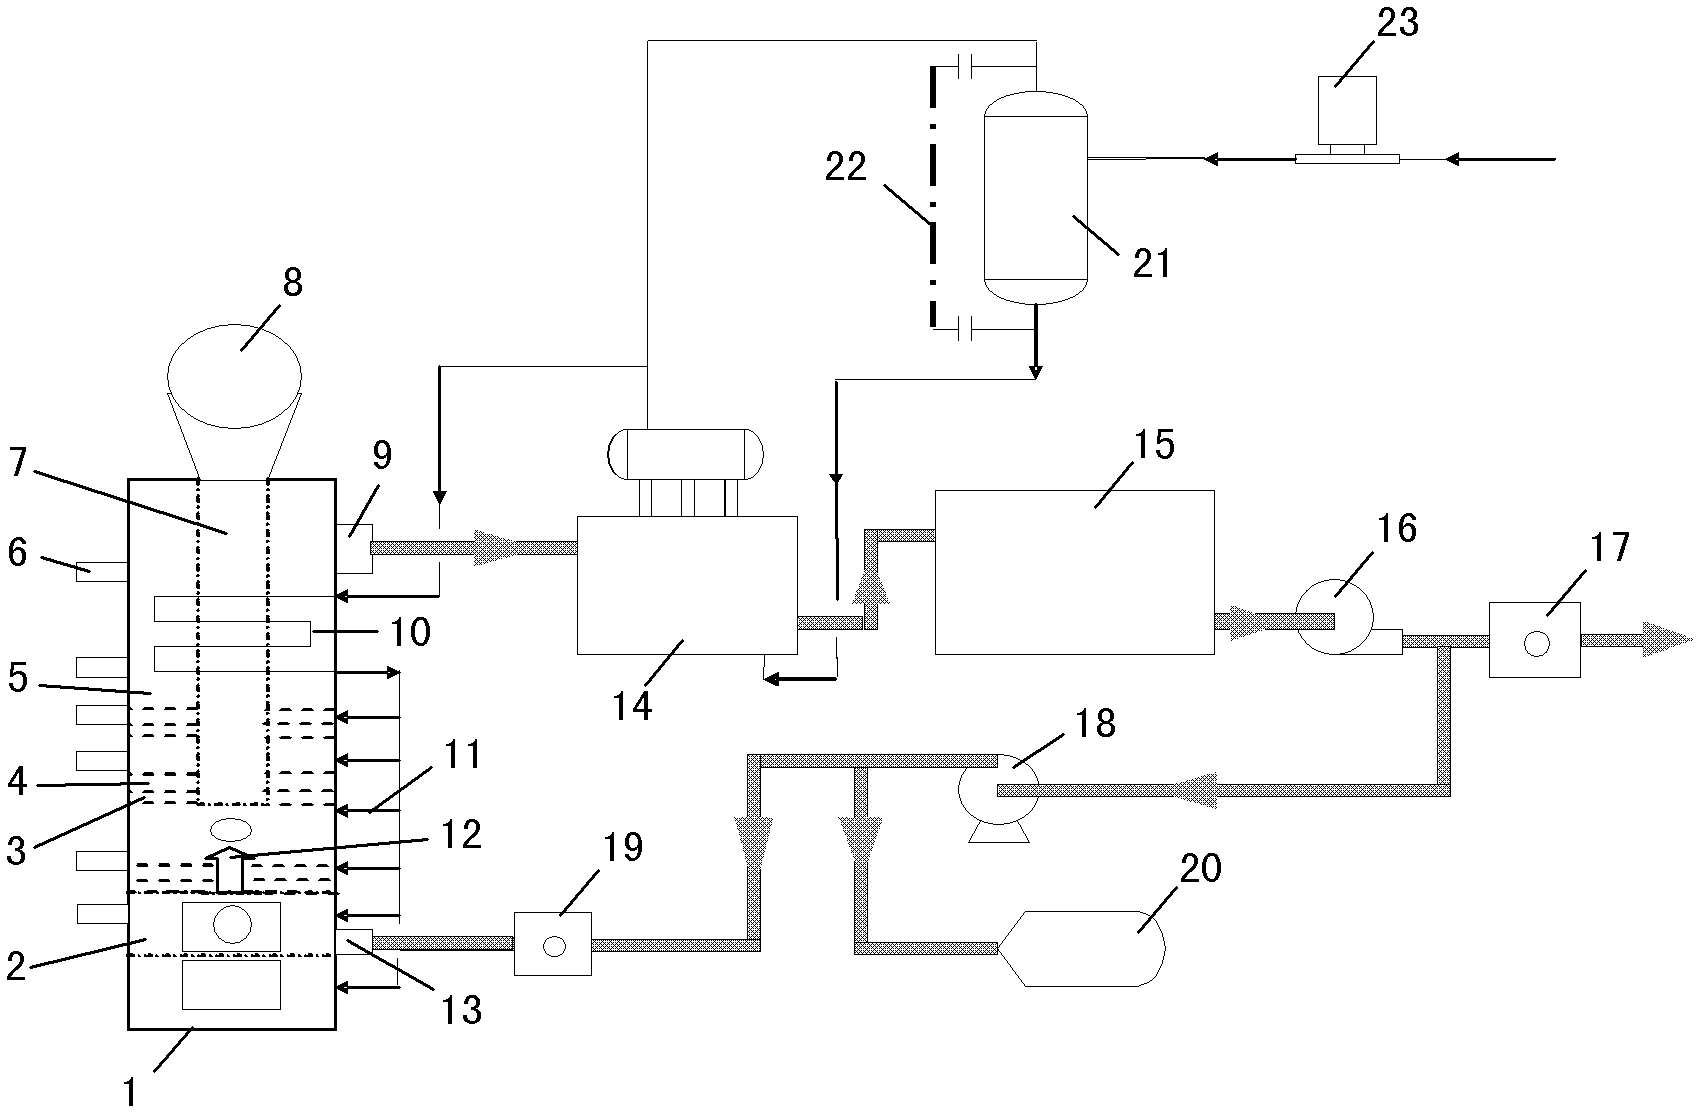 Method for self-heating pyrolysis gasification of biomass by gas backflow combustion